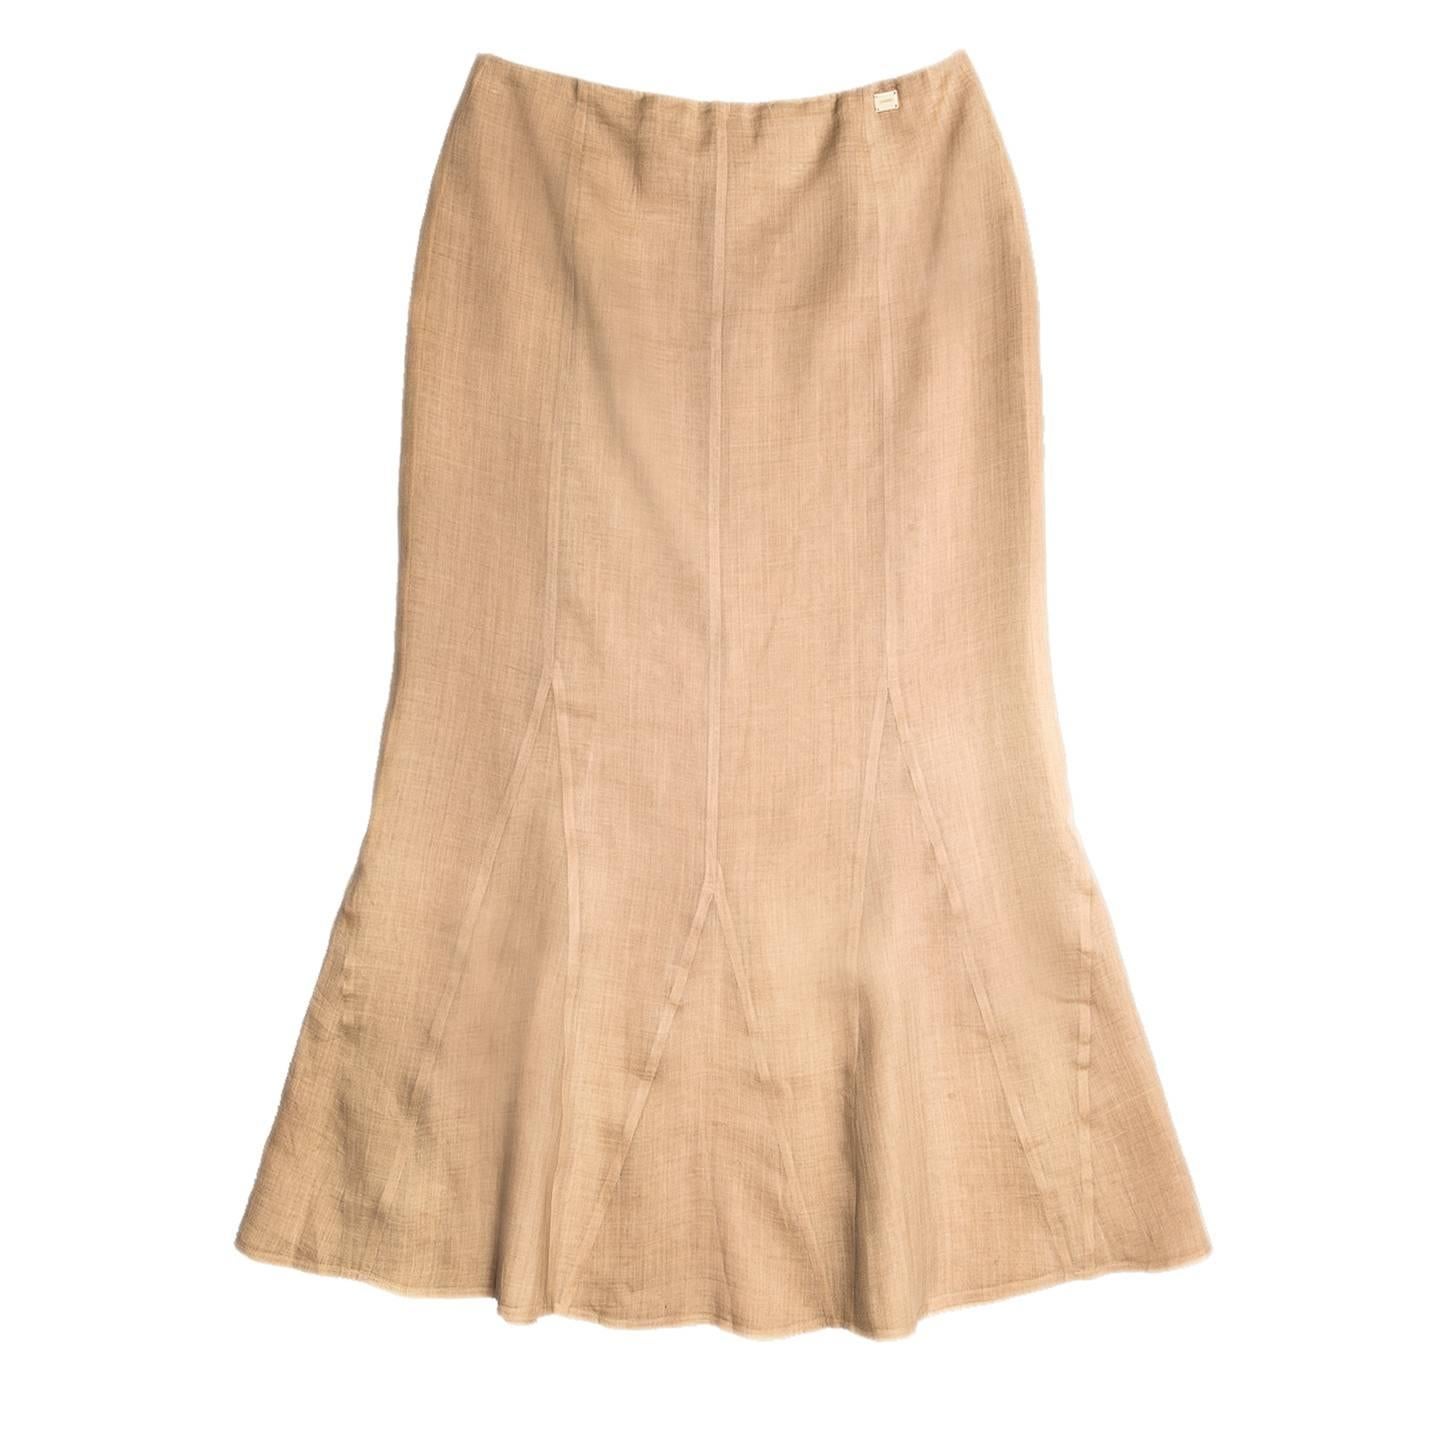 Ankle length tan ramie skirt fitted from waist to knees, with flare at hem thanks to the godet inserts. The color is natural echru, the fabric light and a sheer, for this reason the skirt is composed of two layers. A small Chanel placket is sewn at